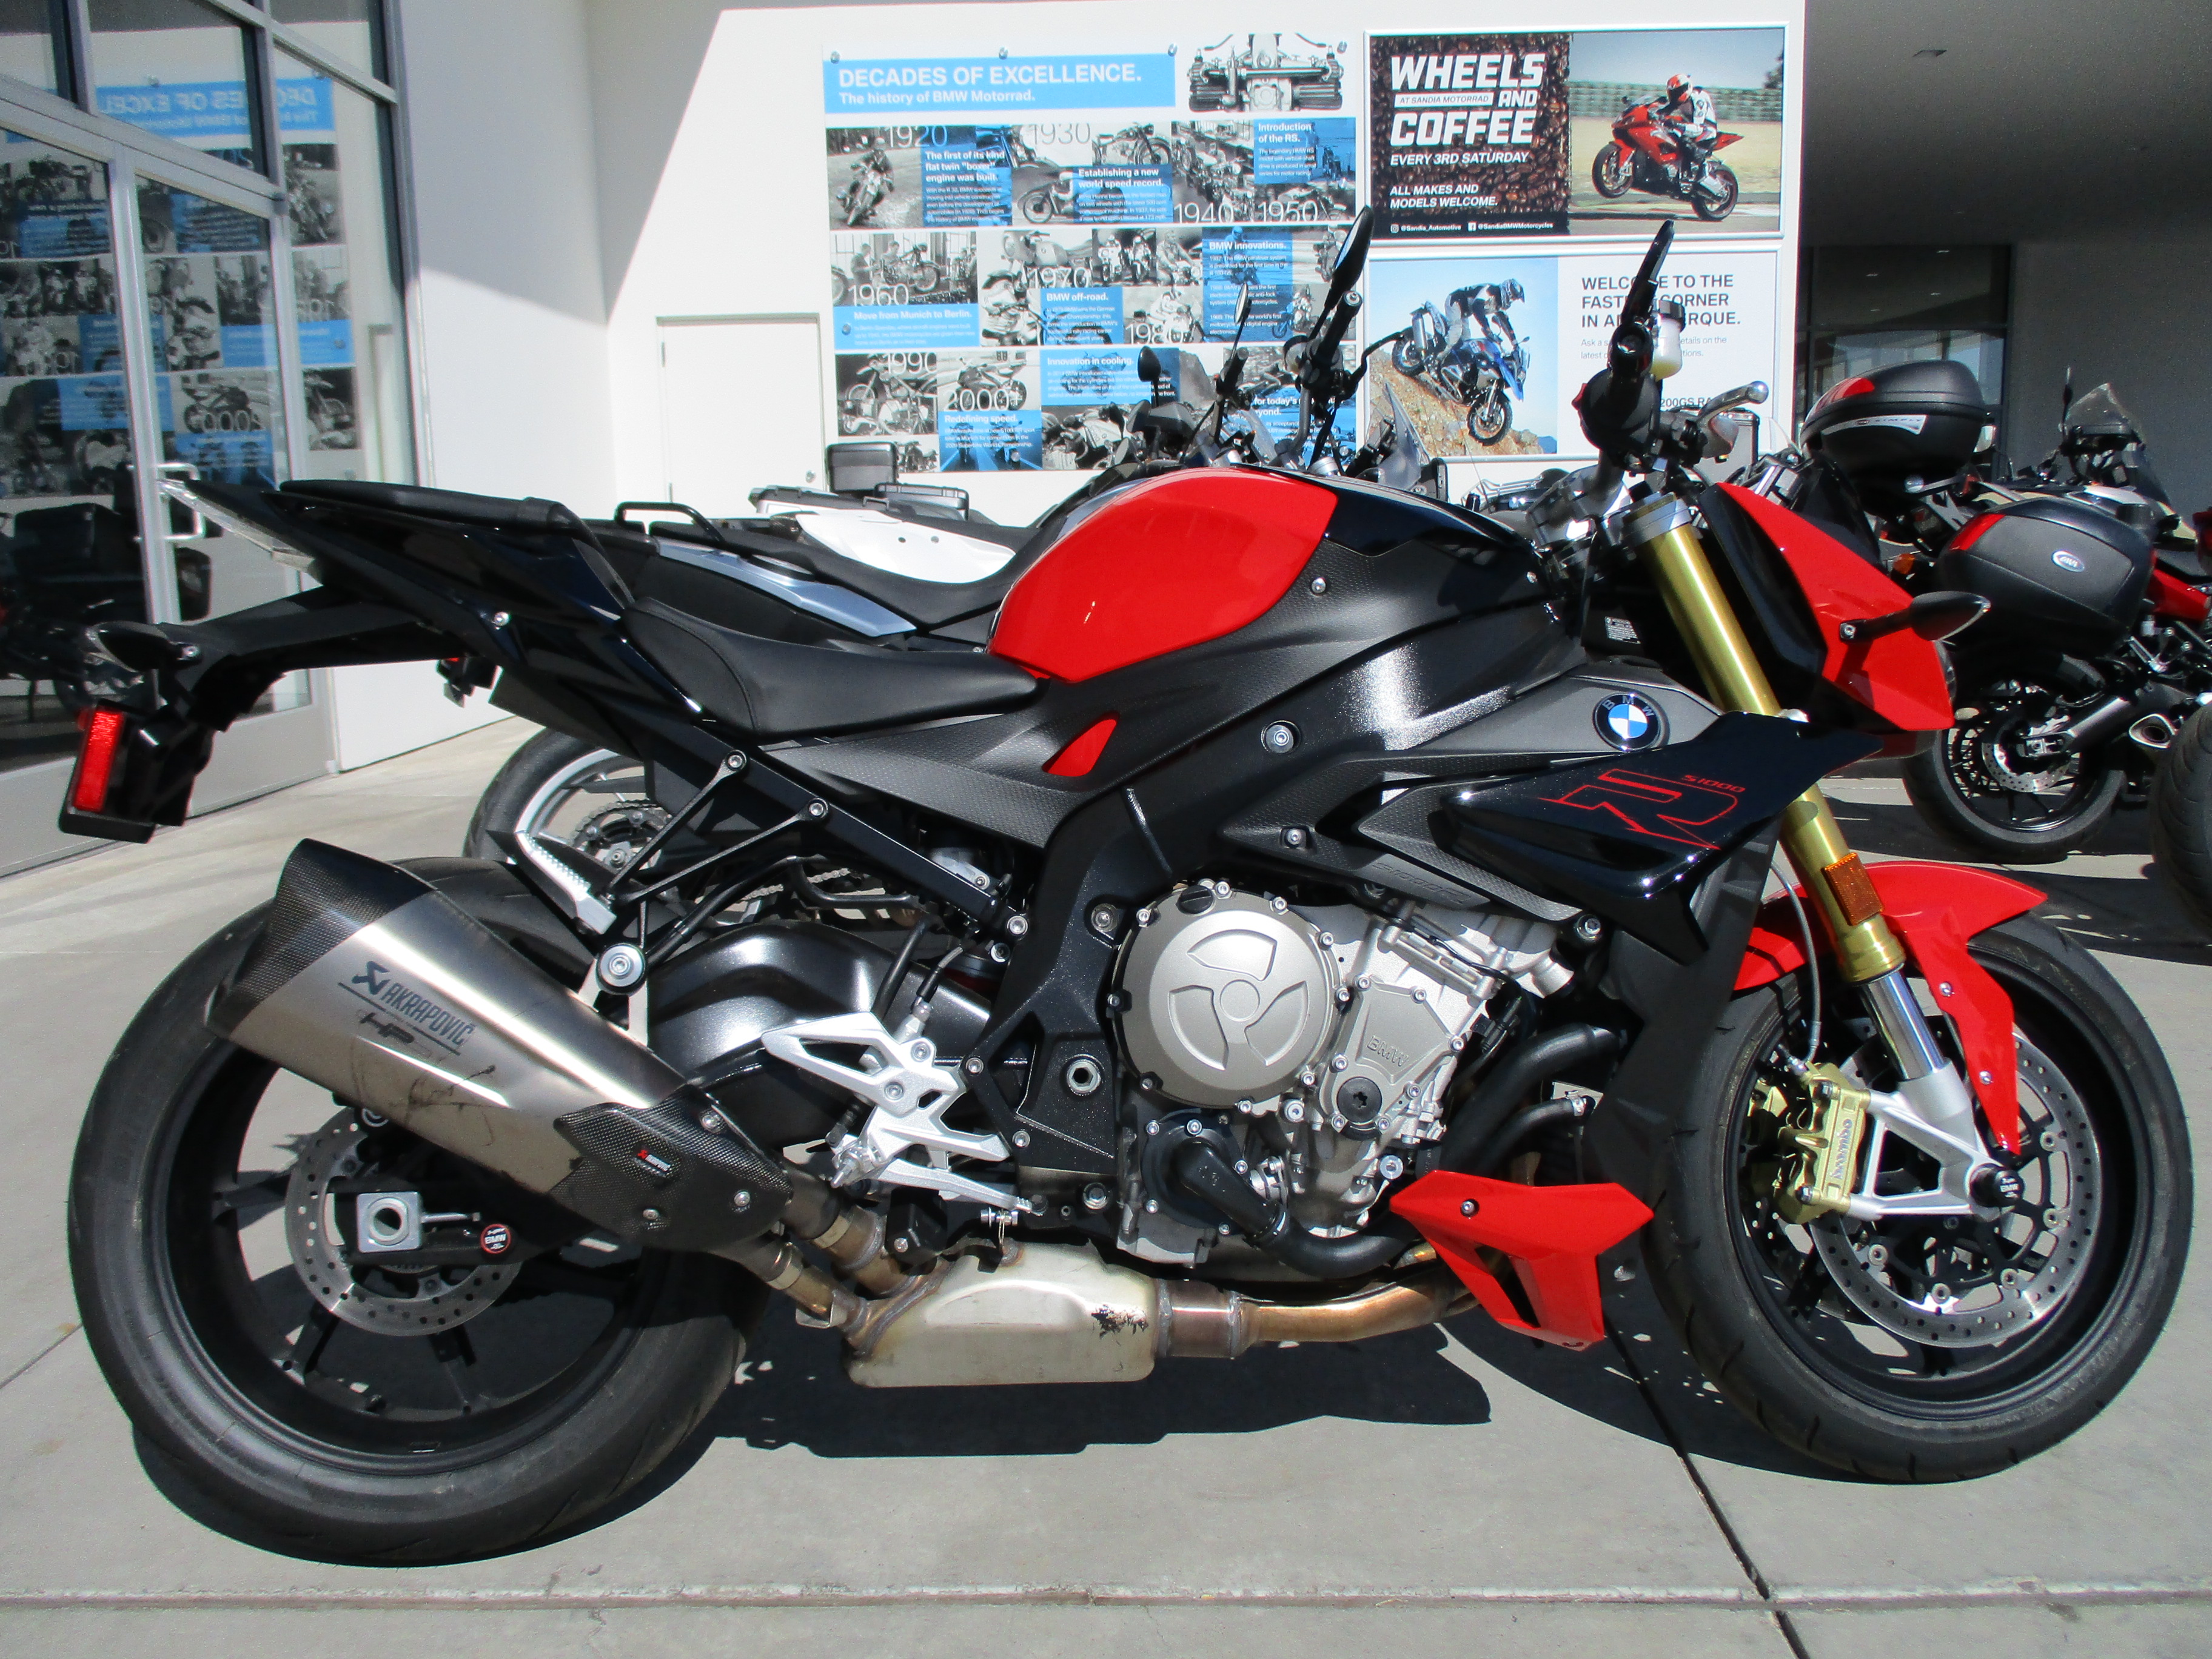 Pre-Owned Motorcycle Inventory - S1000R - Sandia BMW ...